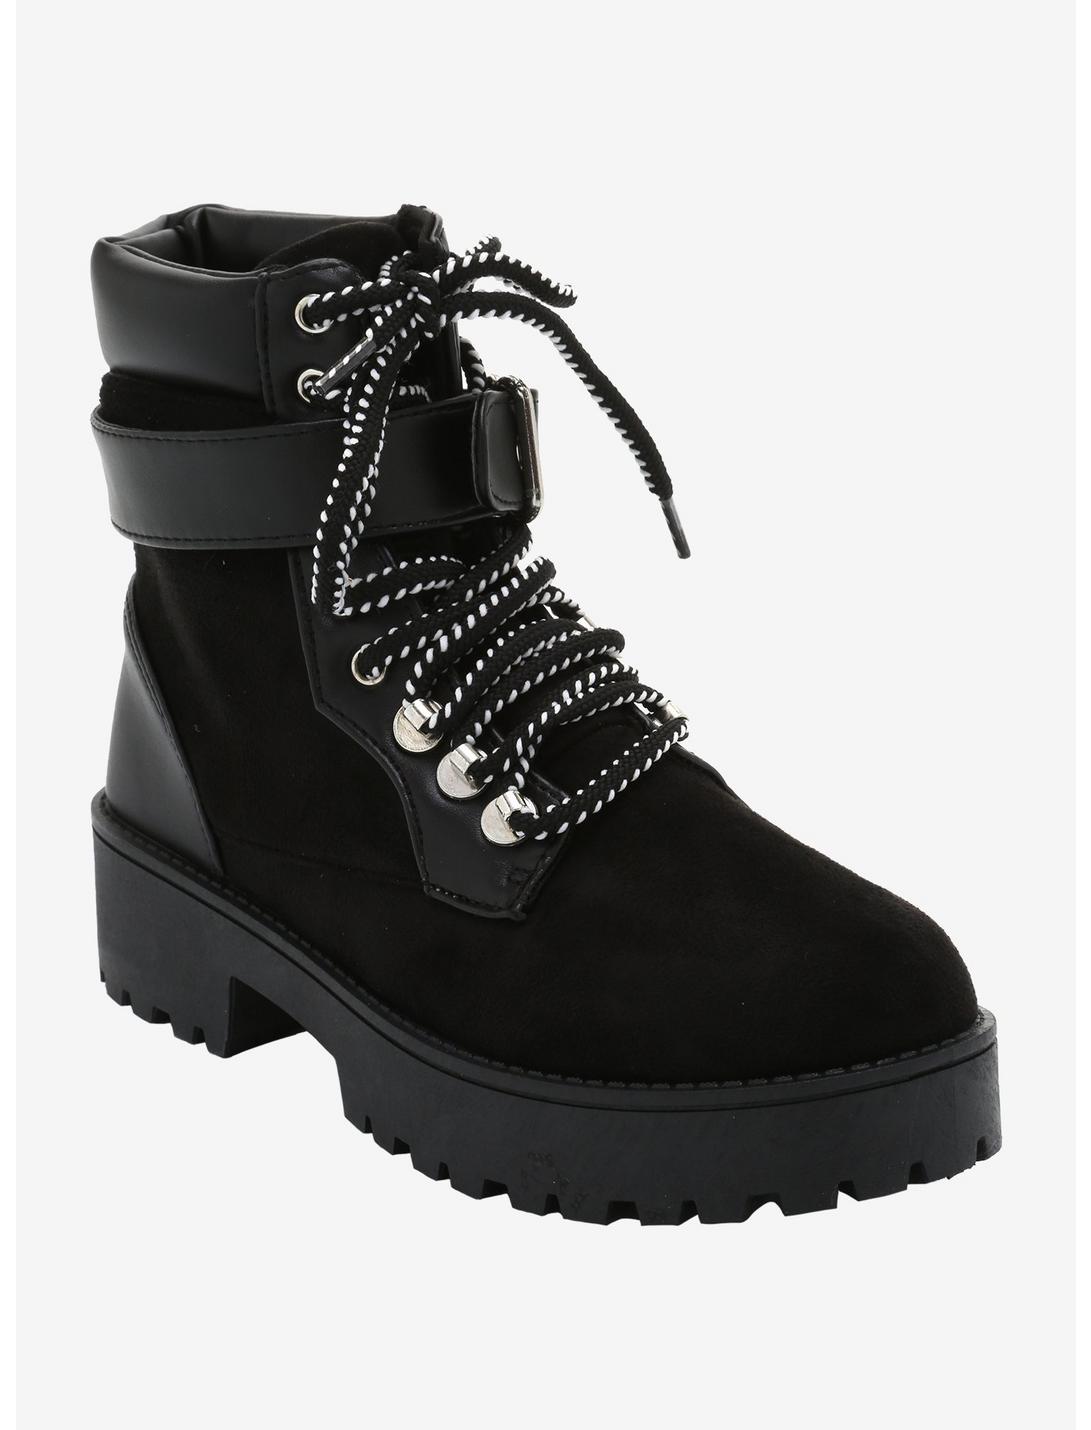 Buckle Strap Combat Boots | Hot Topic